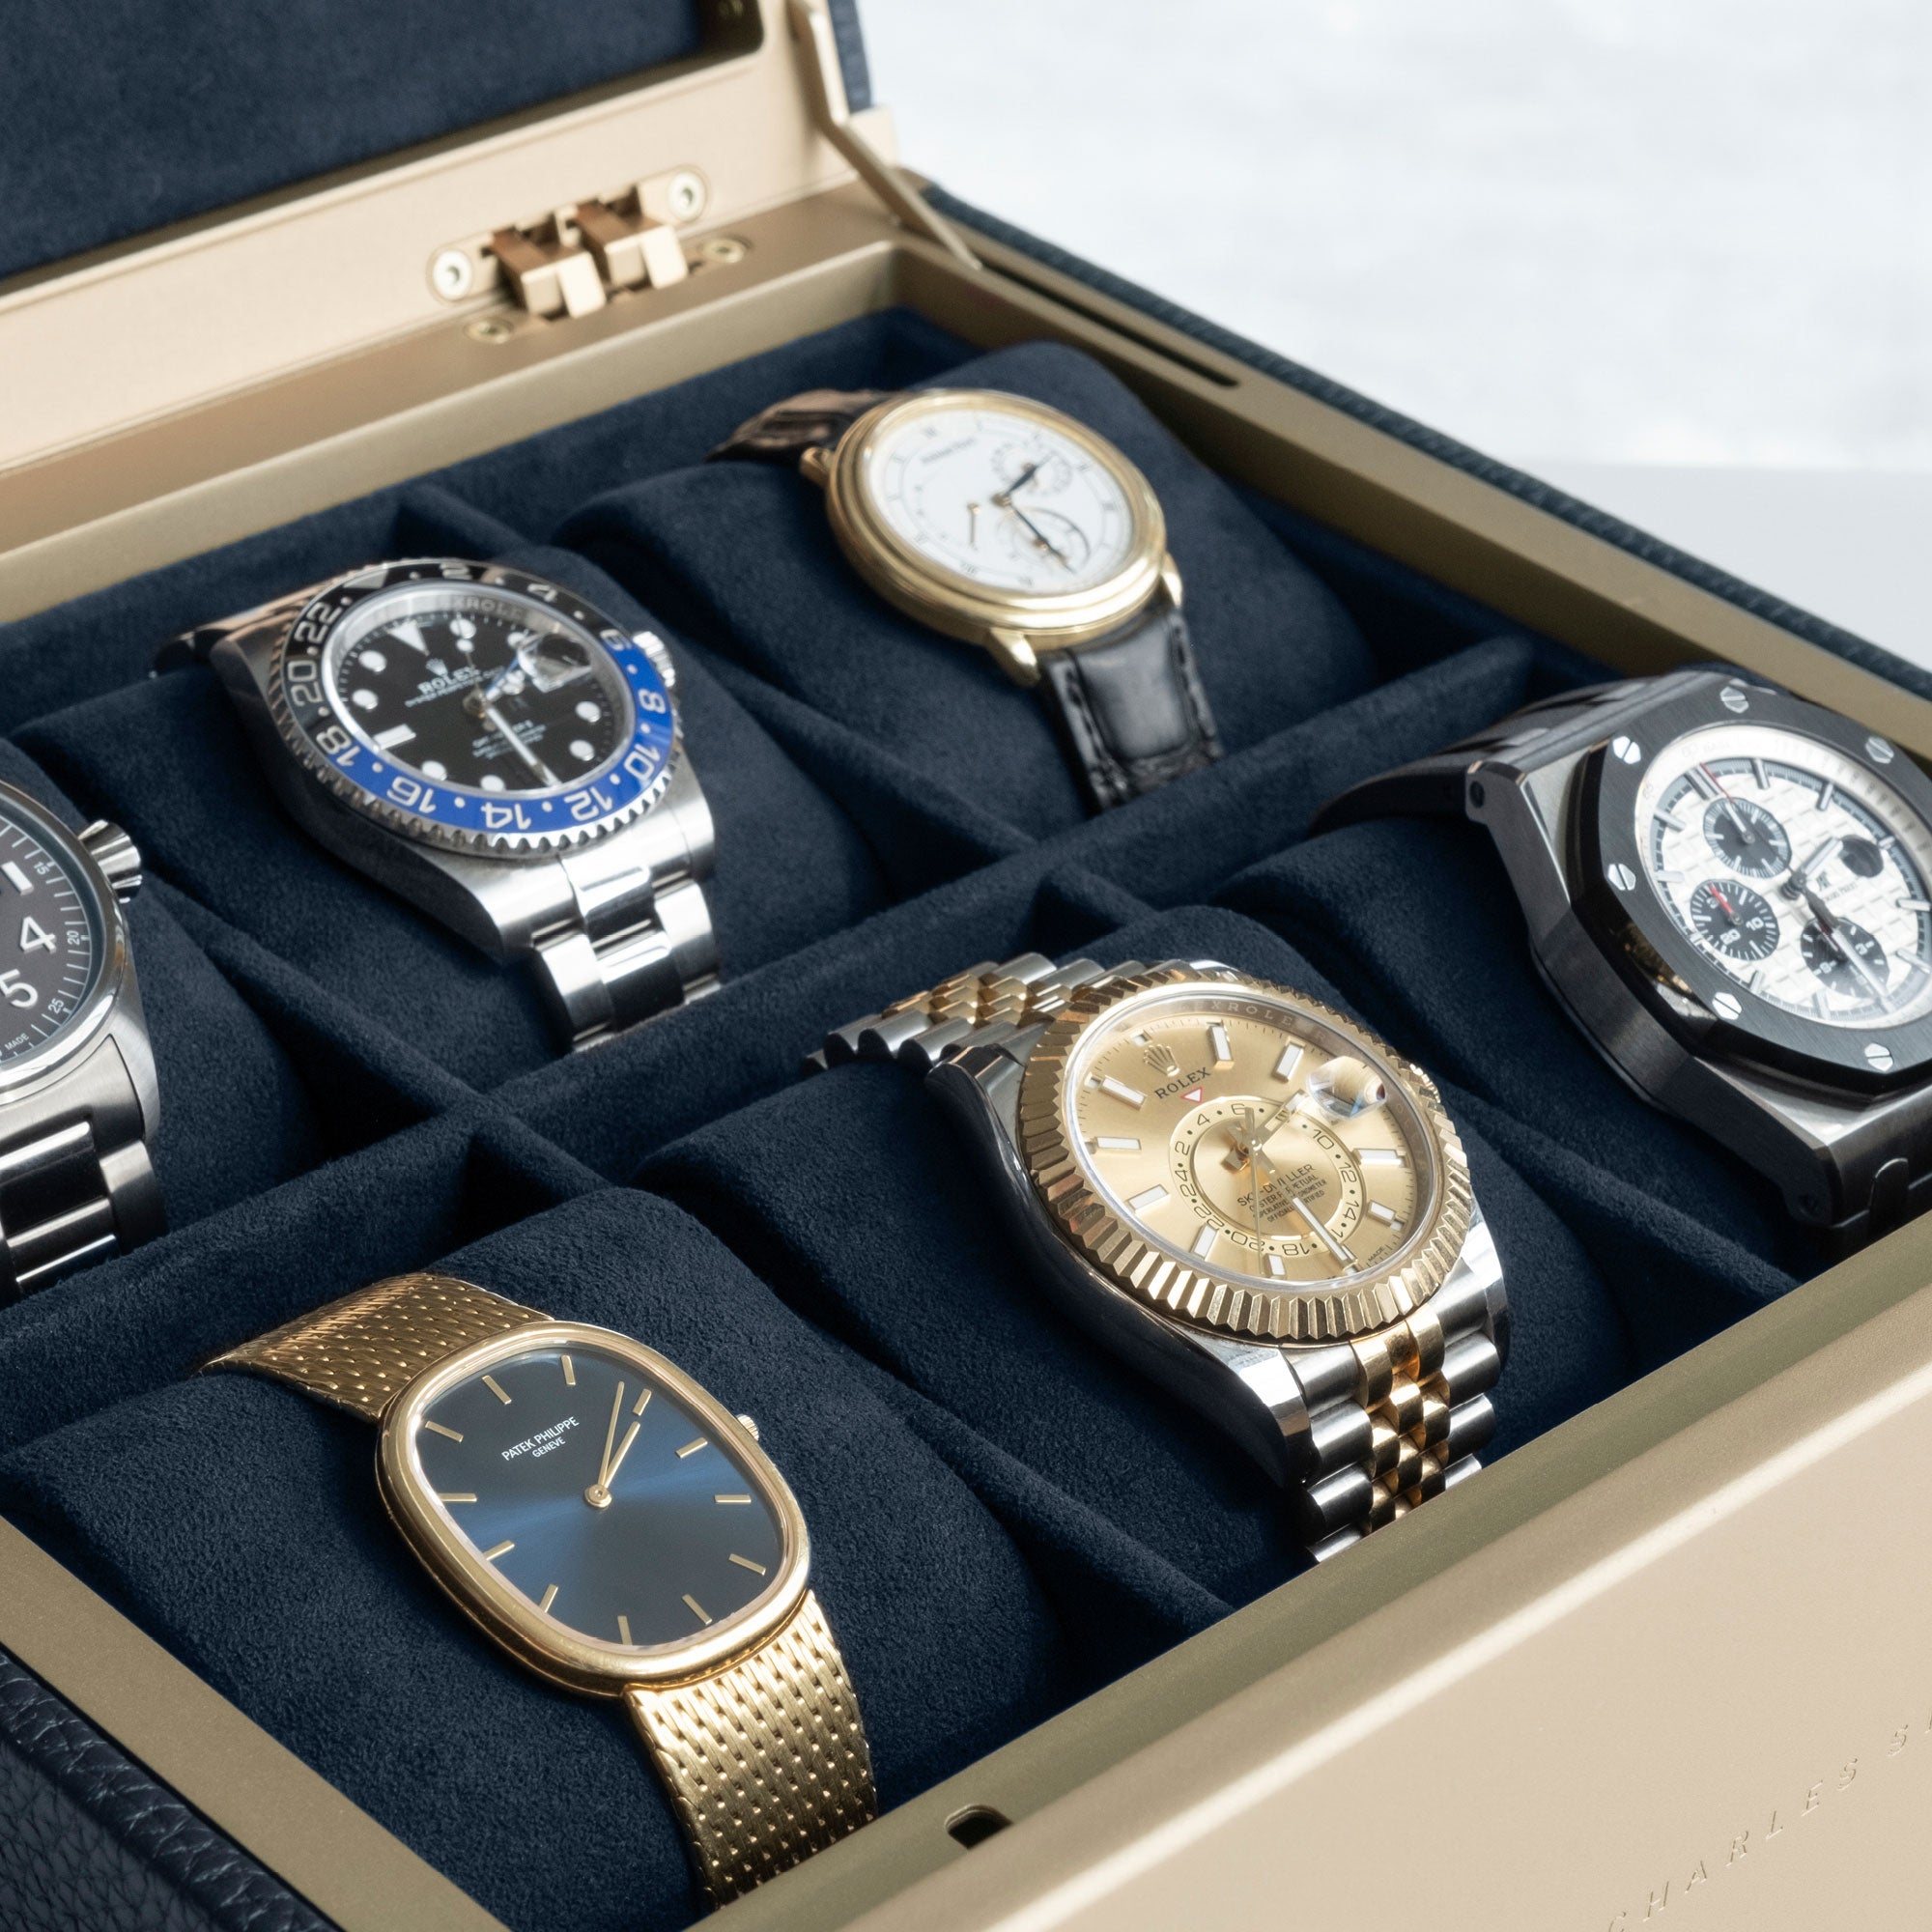 Detail photo of watch collection of 6 watches displayed in the gold Spence 6 watch box in marine leather.